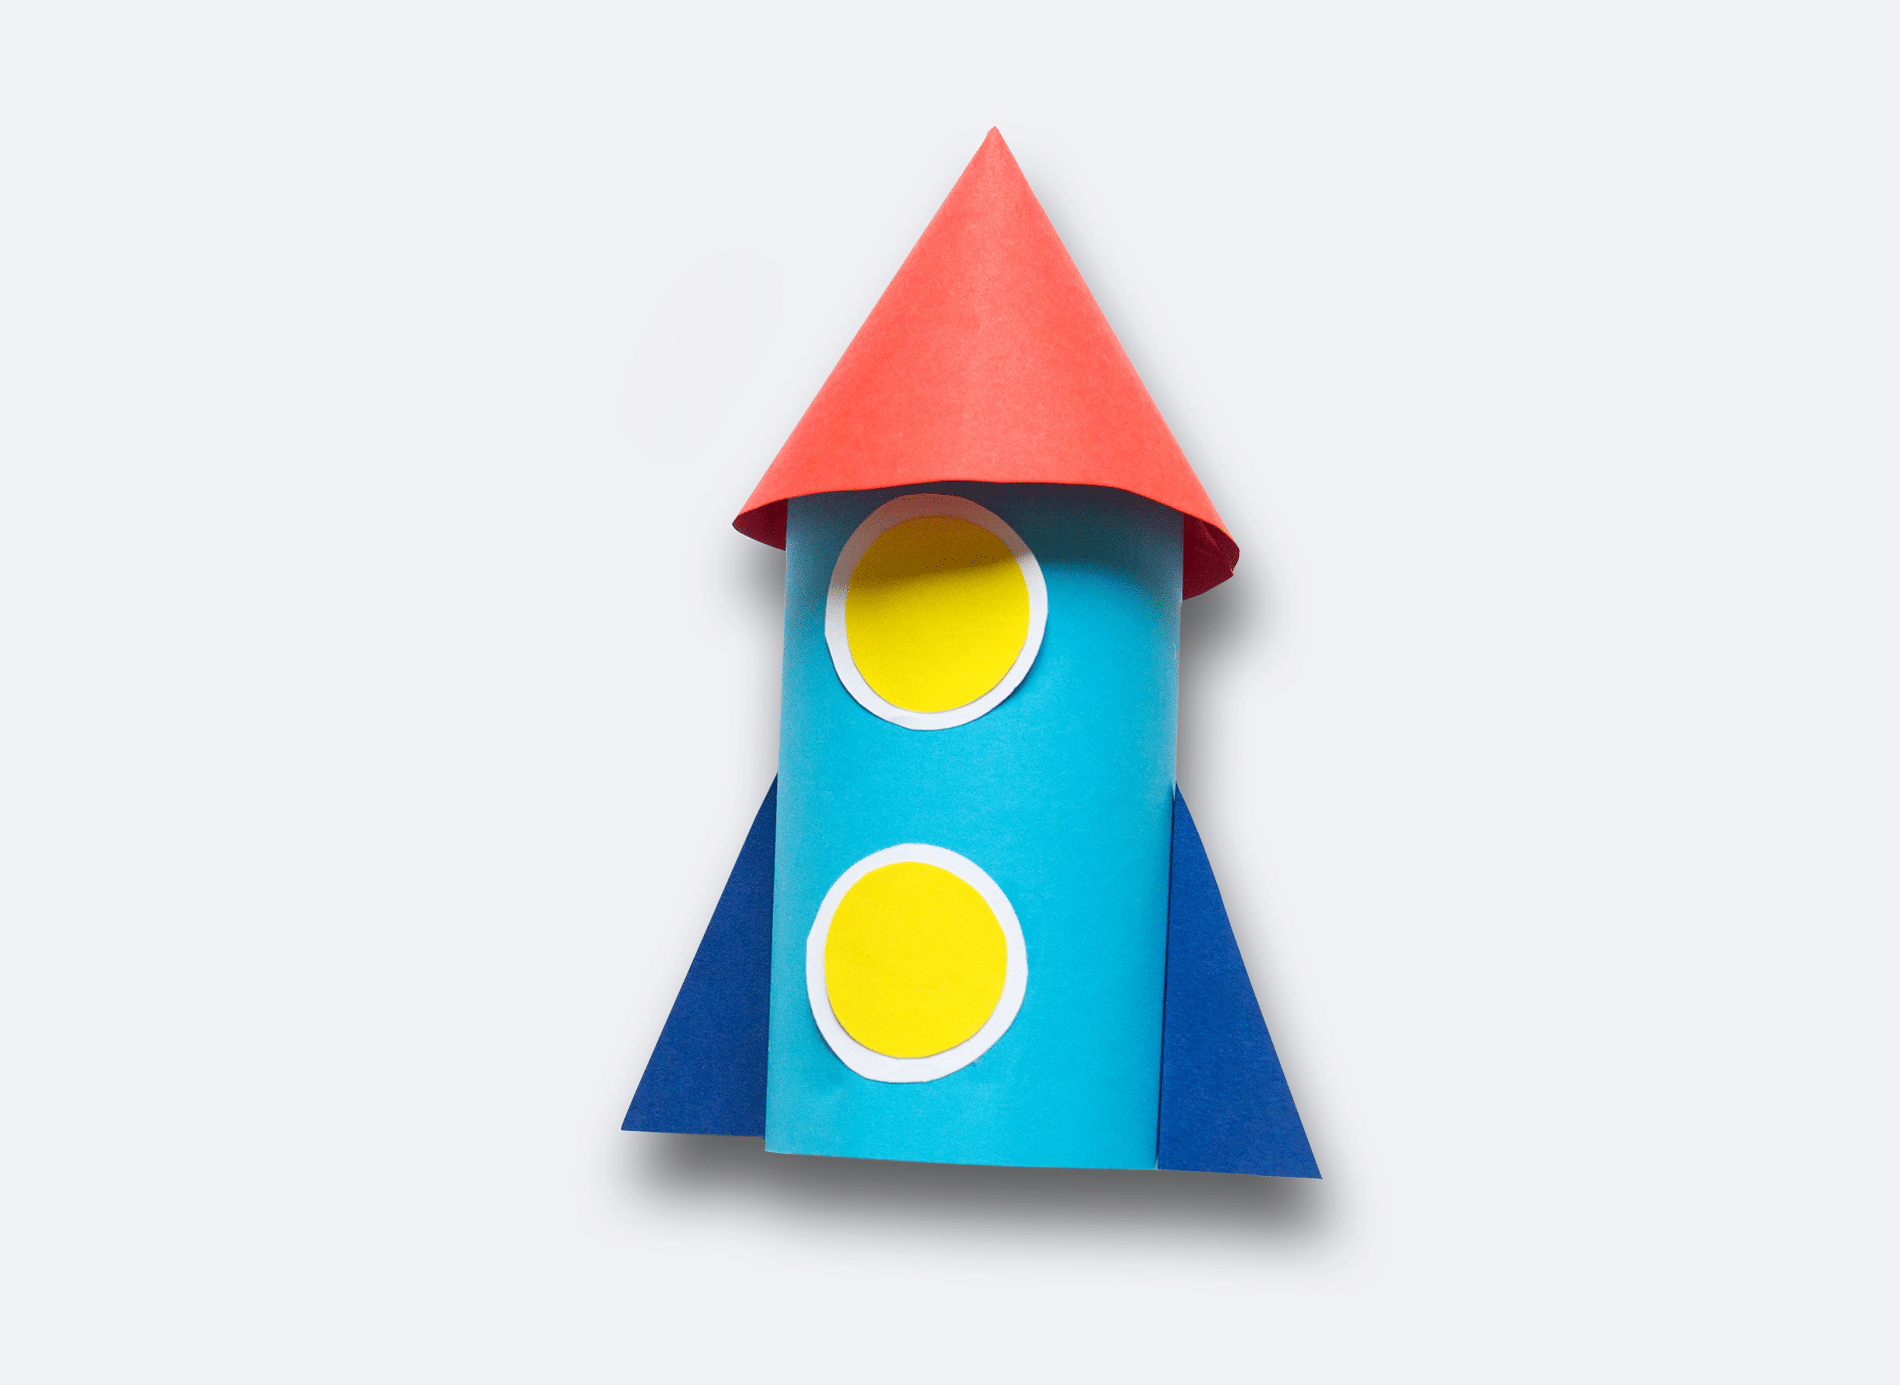 A blue handmade rocket with yellow windows and a red cone. The rocket is made out of a film cannister and construction paper.